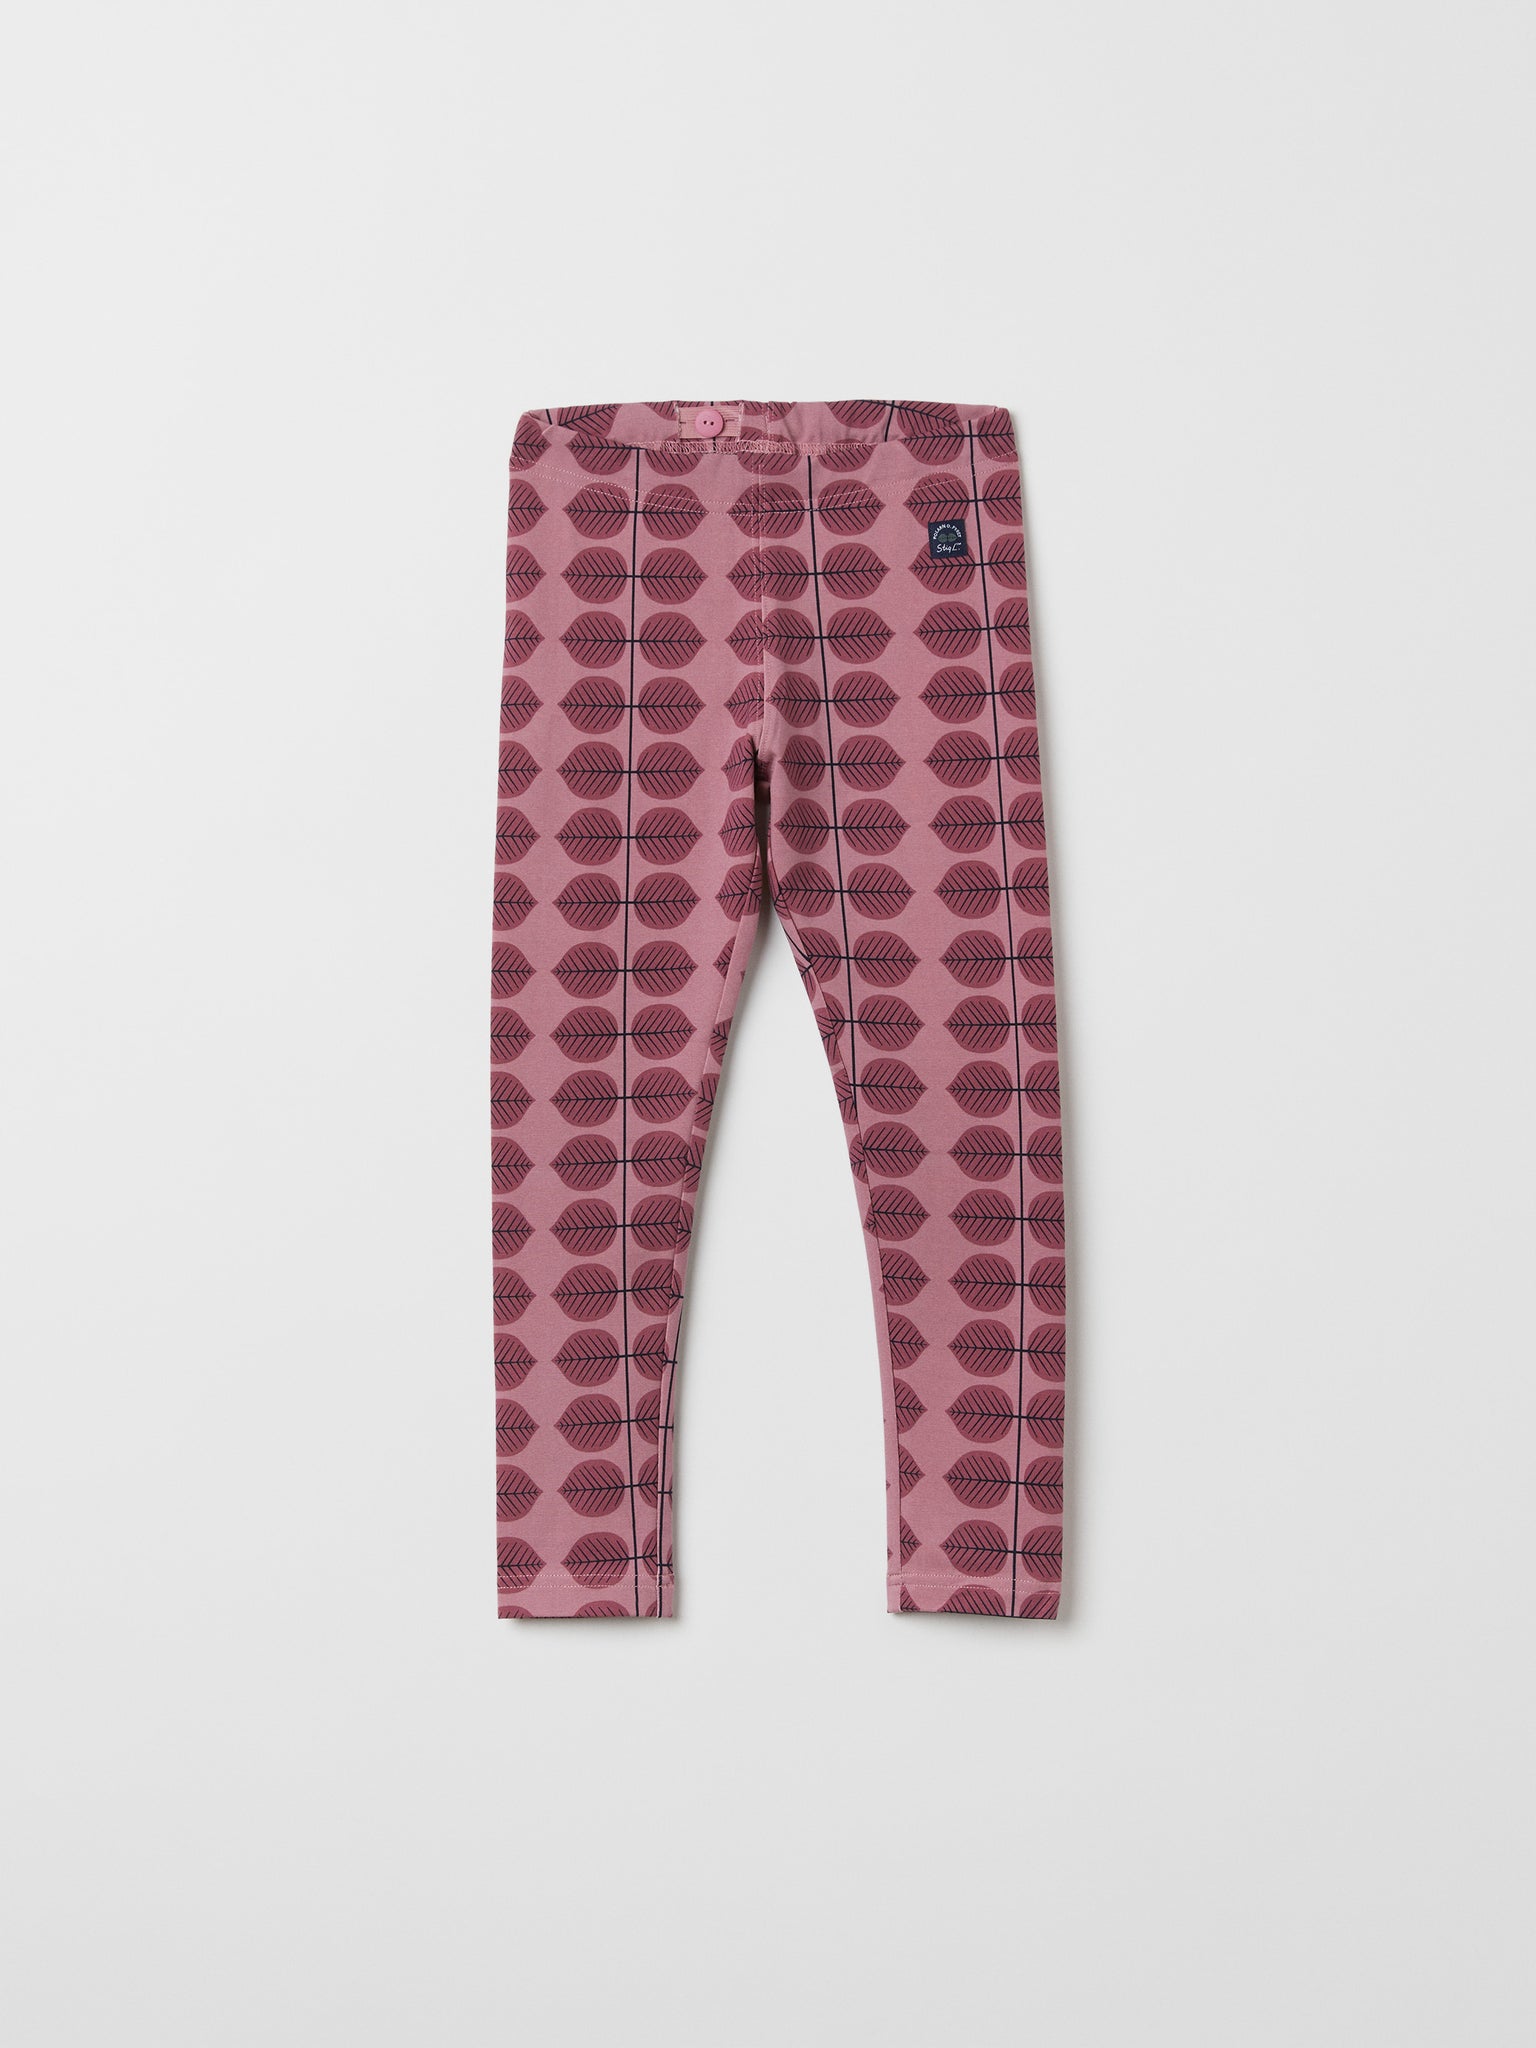 Scandi Organic Cotton Kids Leggings Red from the Polarn O. Pyret kidswear collection. Ethically produced kids clothing.